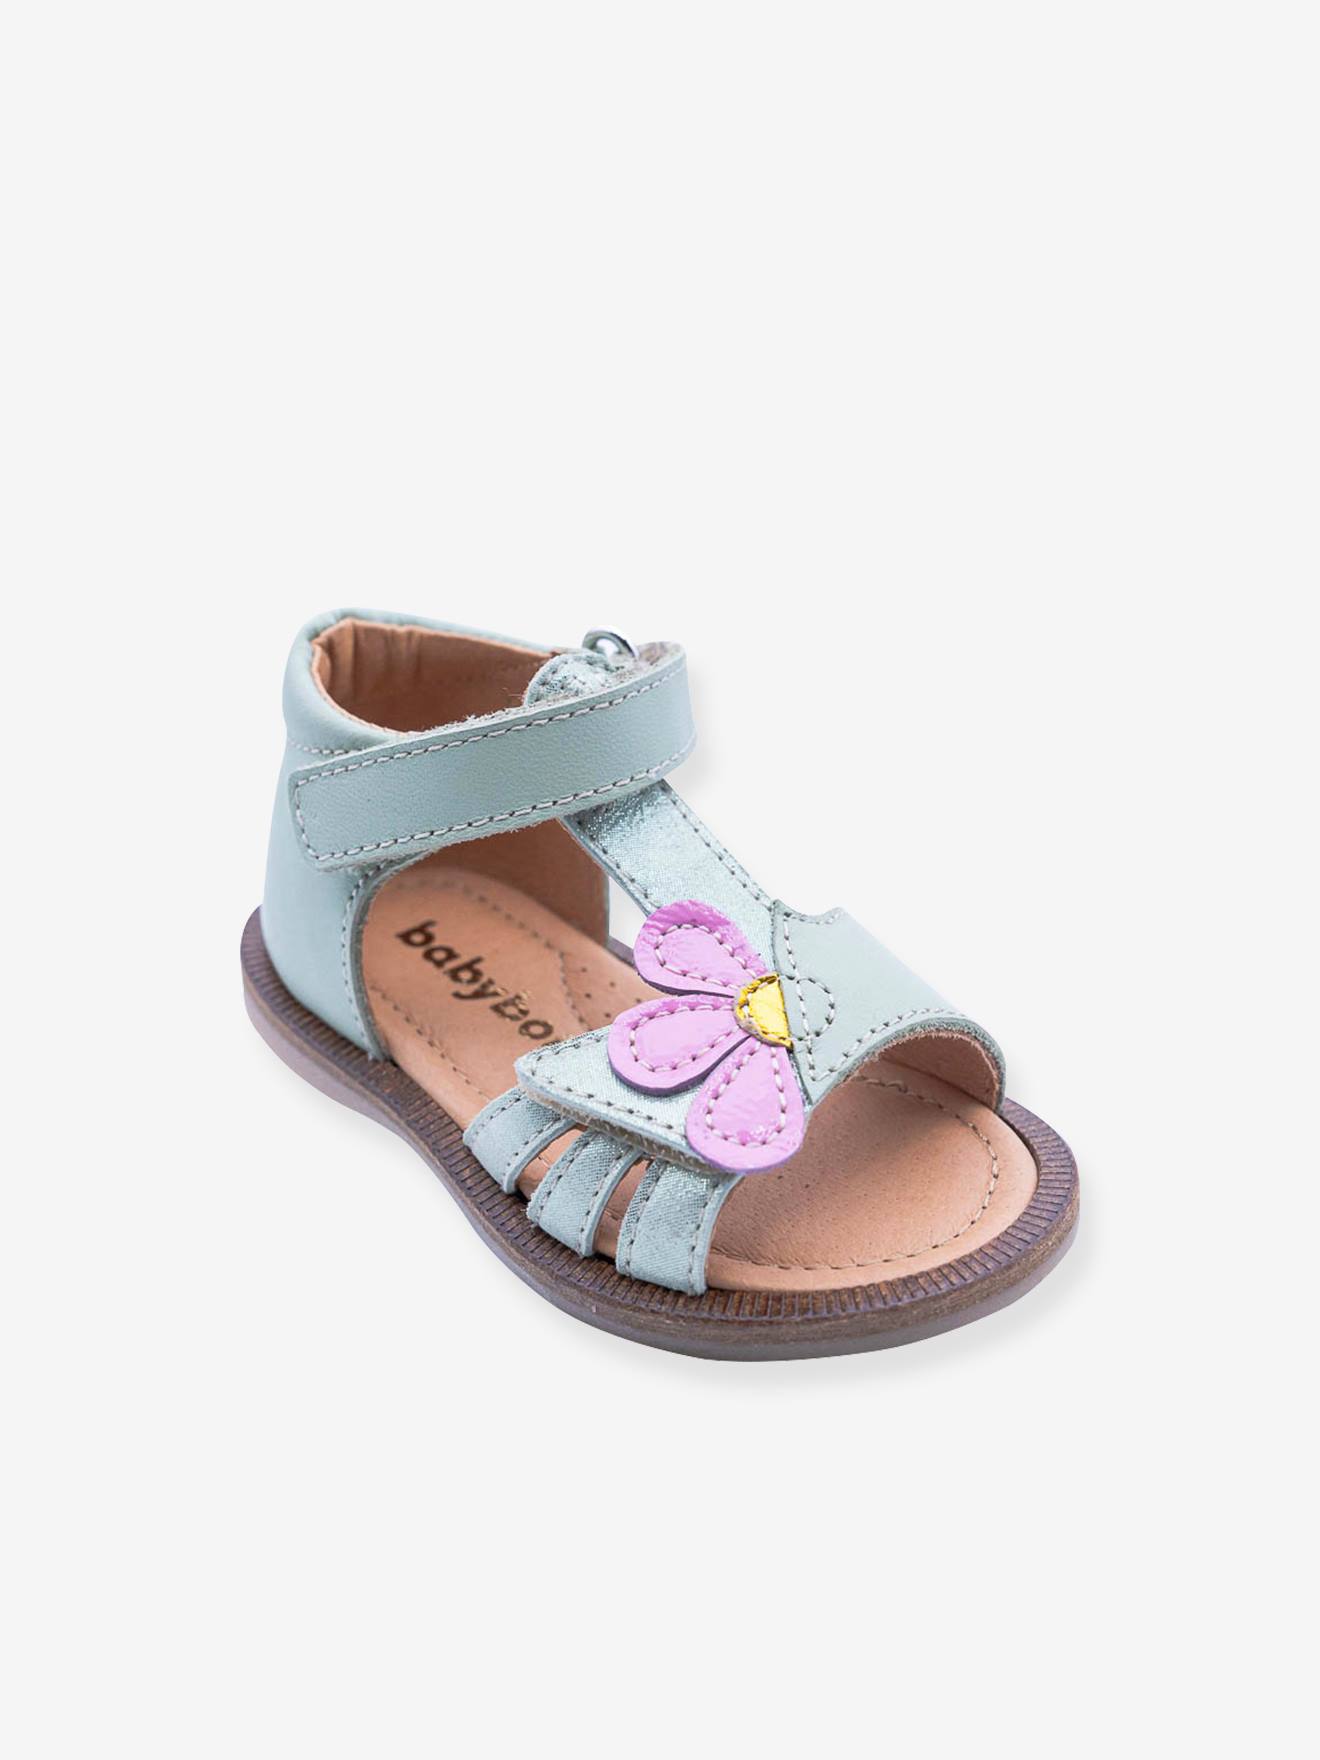 Leather Sandals for Babies 4225B021 by Babybotte(r) aqua green